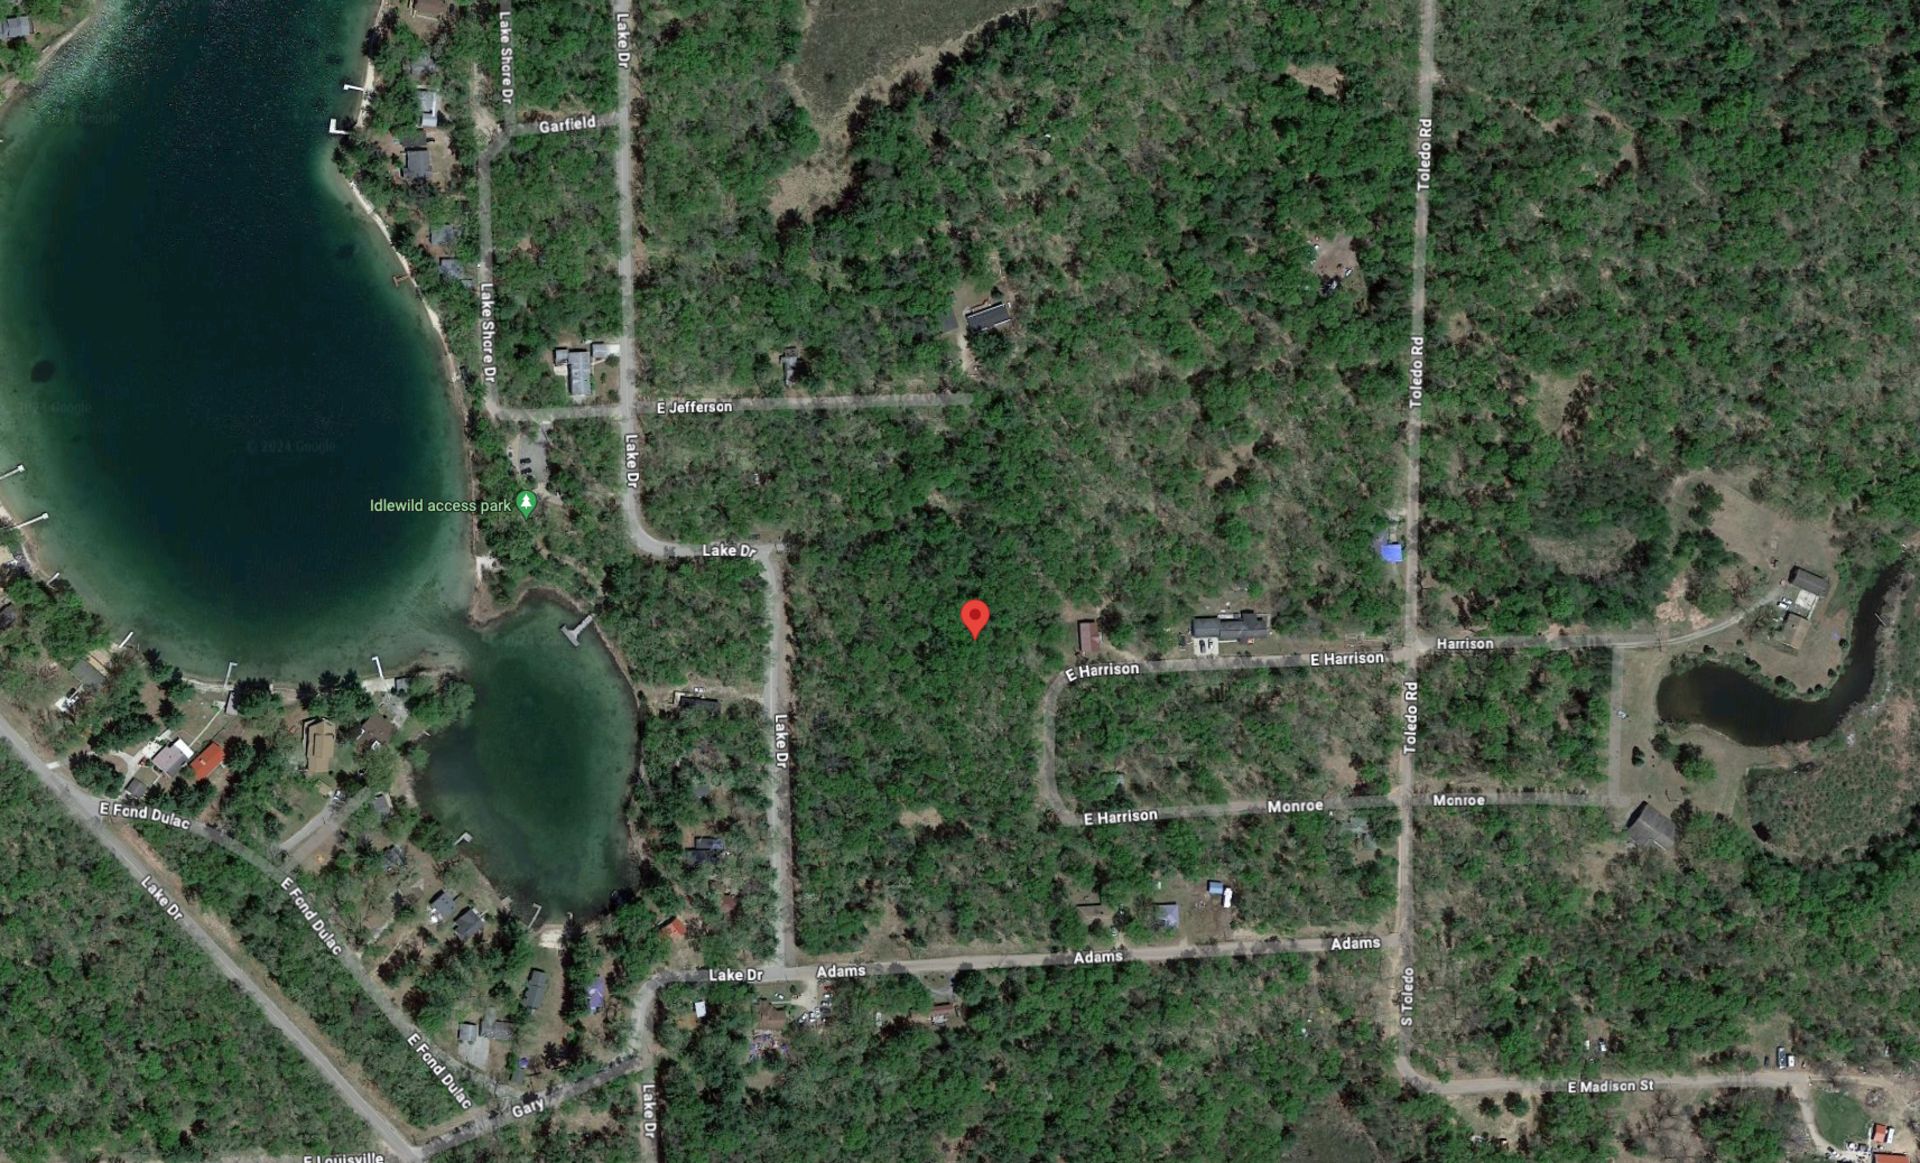 Own Land in Lake County, Michigan - the "Home of Over 100 Lakes"! - Image 11 of 13